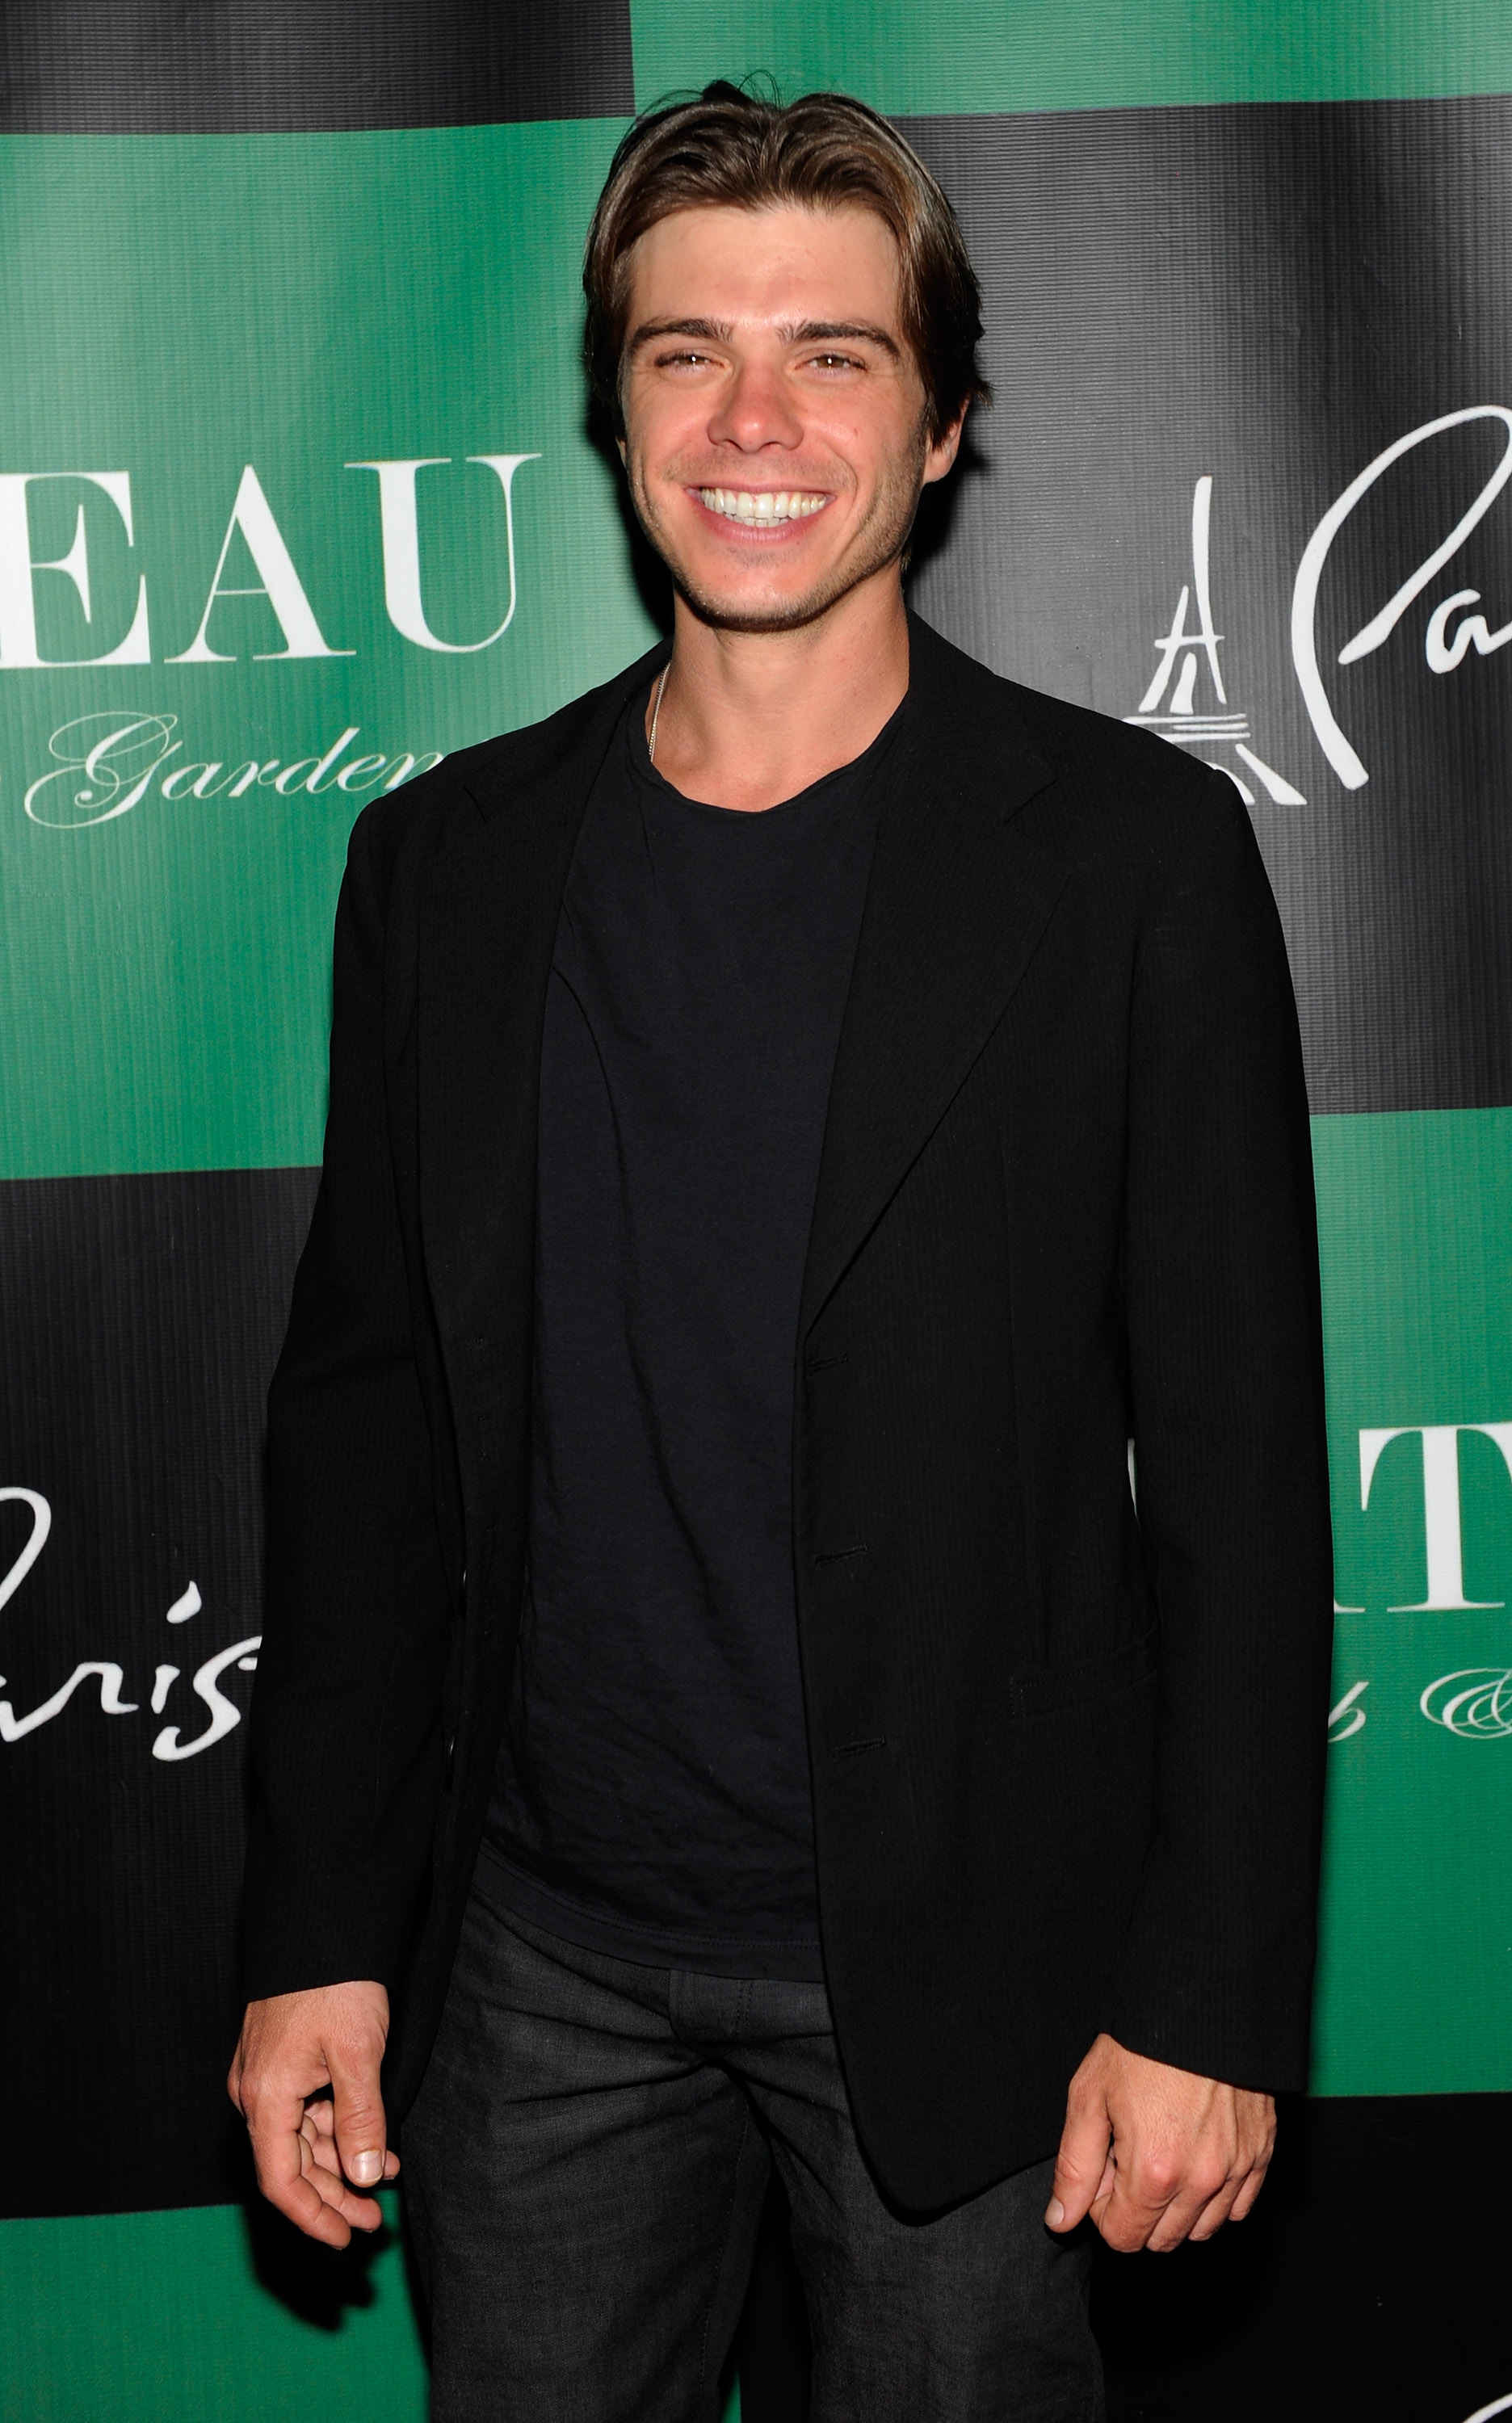 Matthew Lawrrence arrives at the Chateau Nightclub & Gardens at the Paris Las Vegas on April 28, 2012 in Las Vegas, Nevada.  